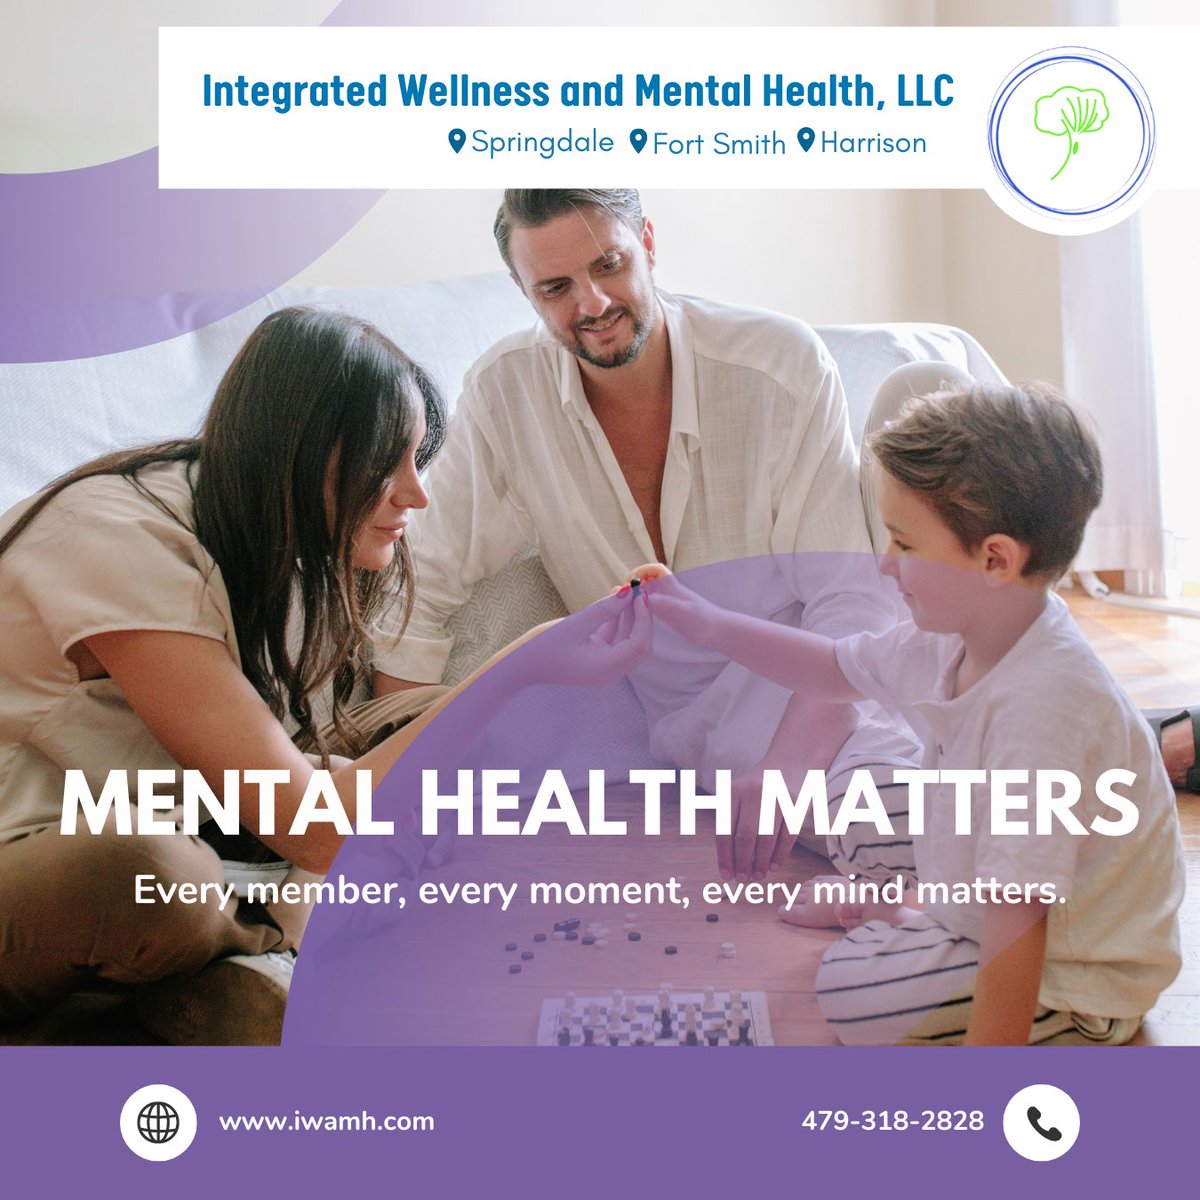 Call us for an appointment today!
dial 479-318-2828

#tuesday
#MentalHealthForAll
#wellbeing
#mentalhealthawareness
#familymentalhealth
#familycare
#anxietyanddepressionawareness
#wellnessforall
#mentalhealthmatters
#mentalhealthsupport